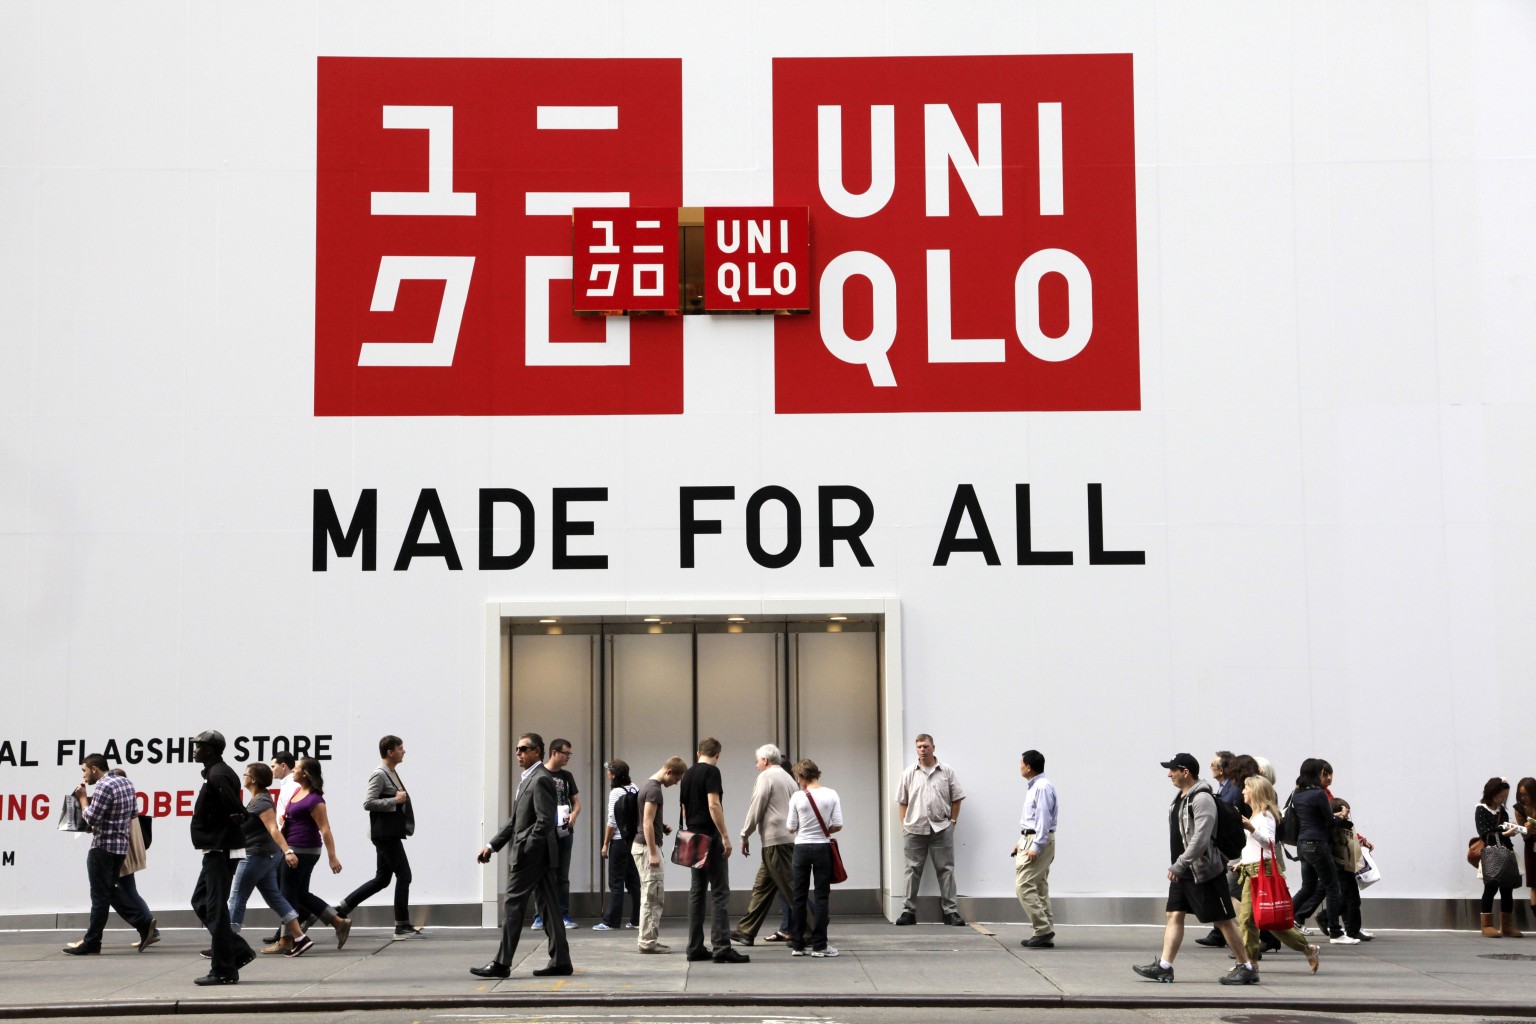 FIR on Twitter Work 5 days a week with that salary in Malaysia you need  to compliment Uniqlo Why Malaysia min wage RM 1200month or RM  570hrfor parttimer kalau bukan bandar utama